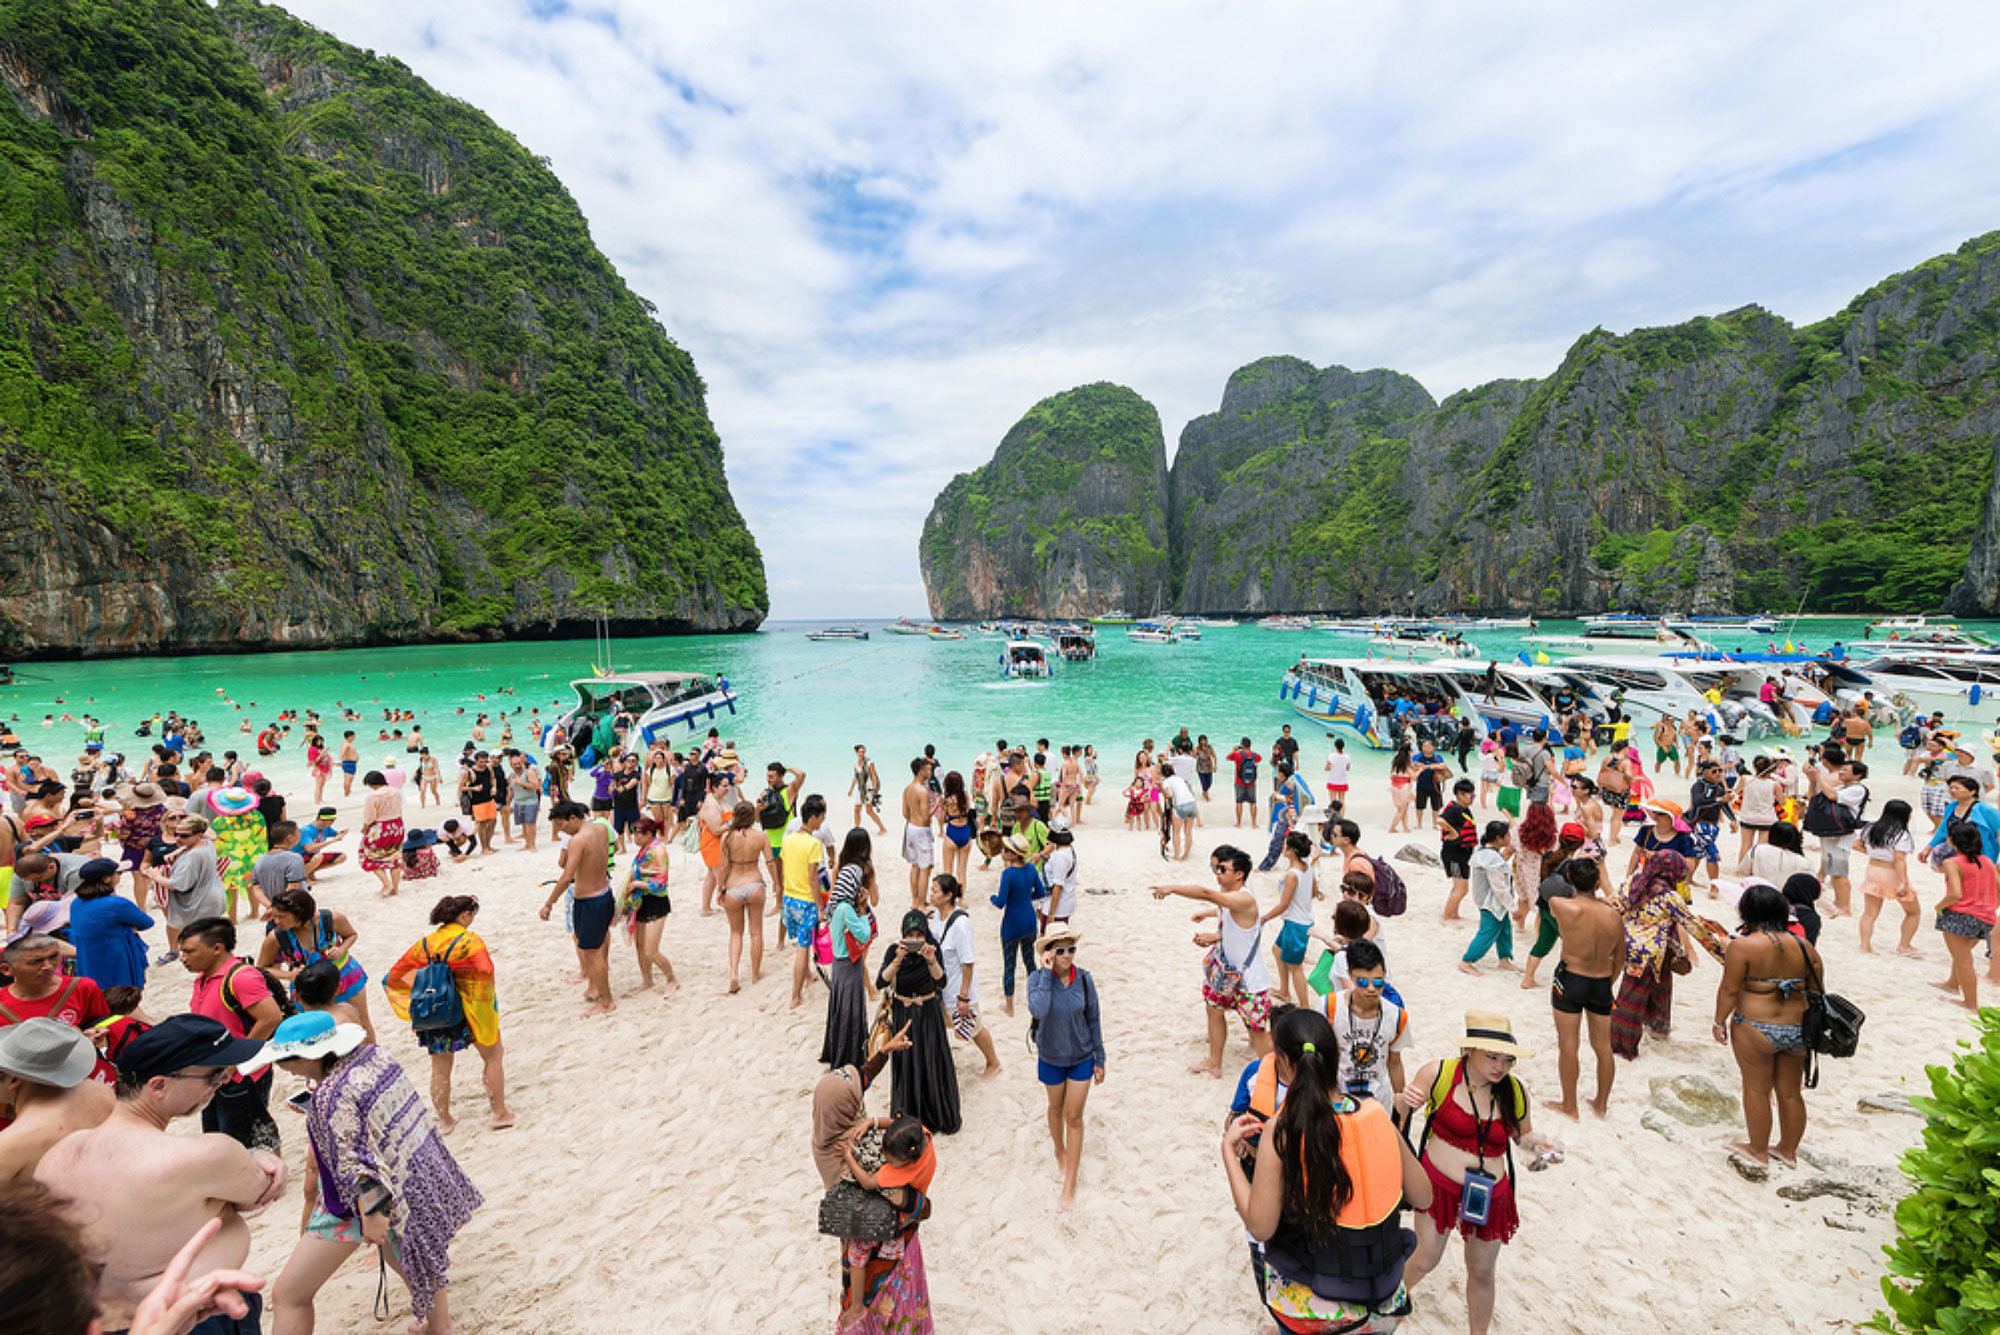 impacts of tourism in thailand